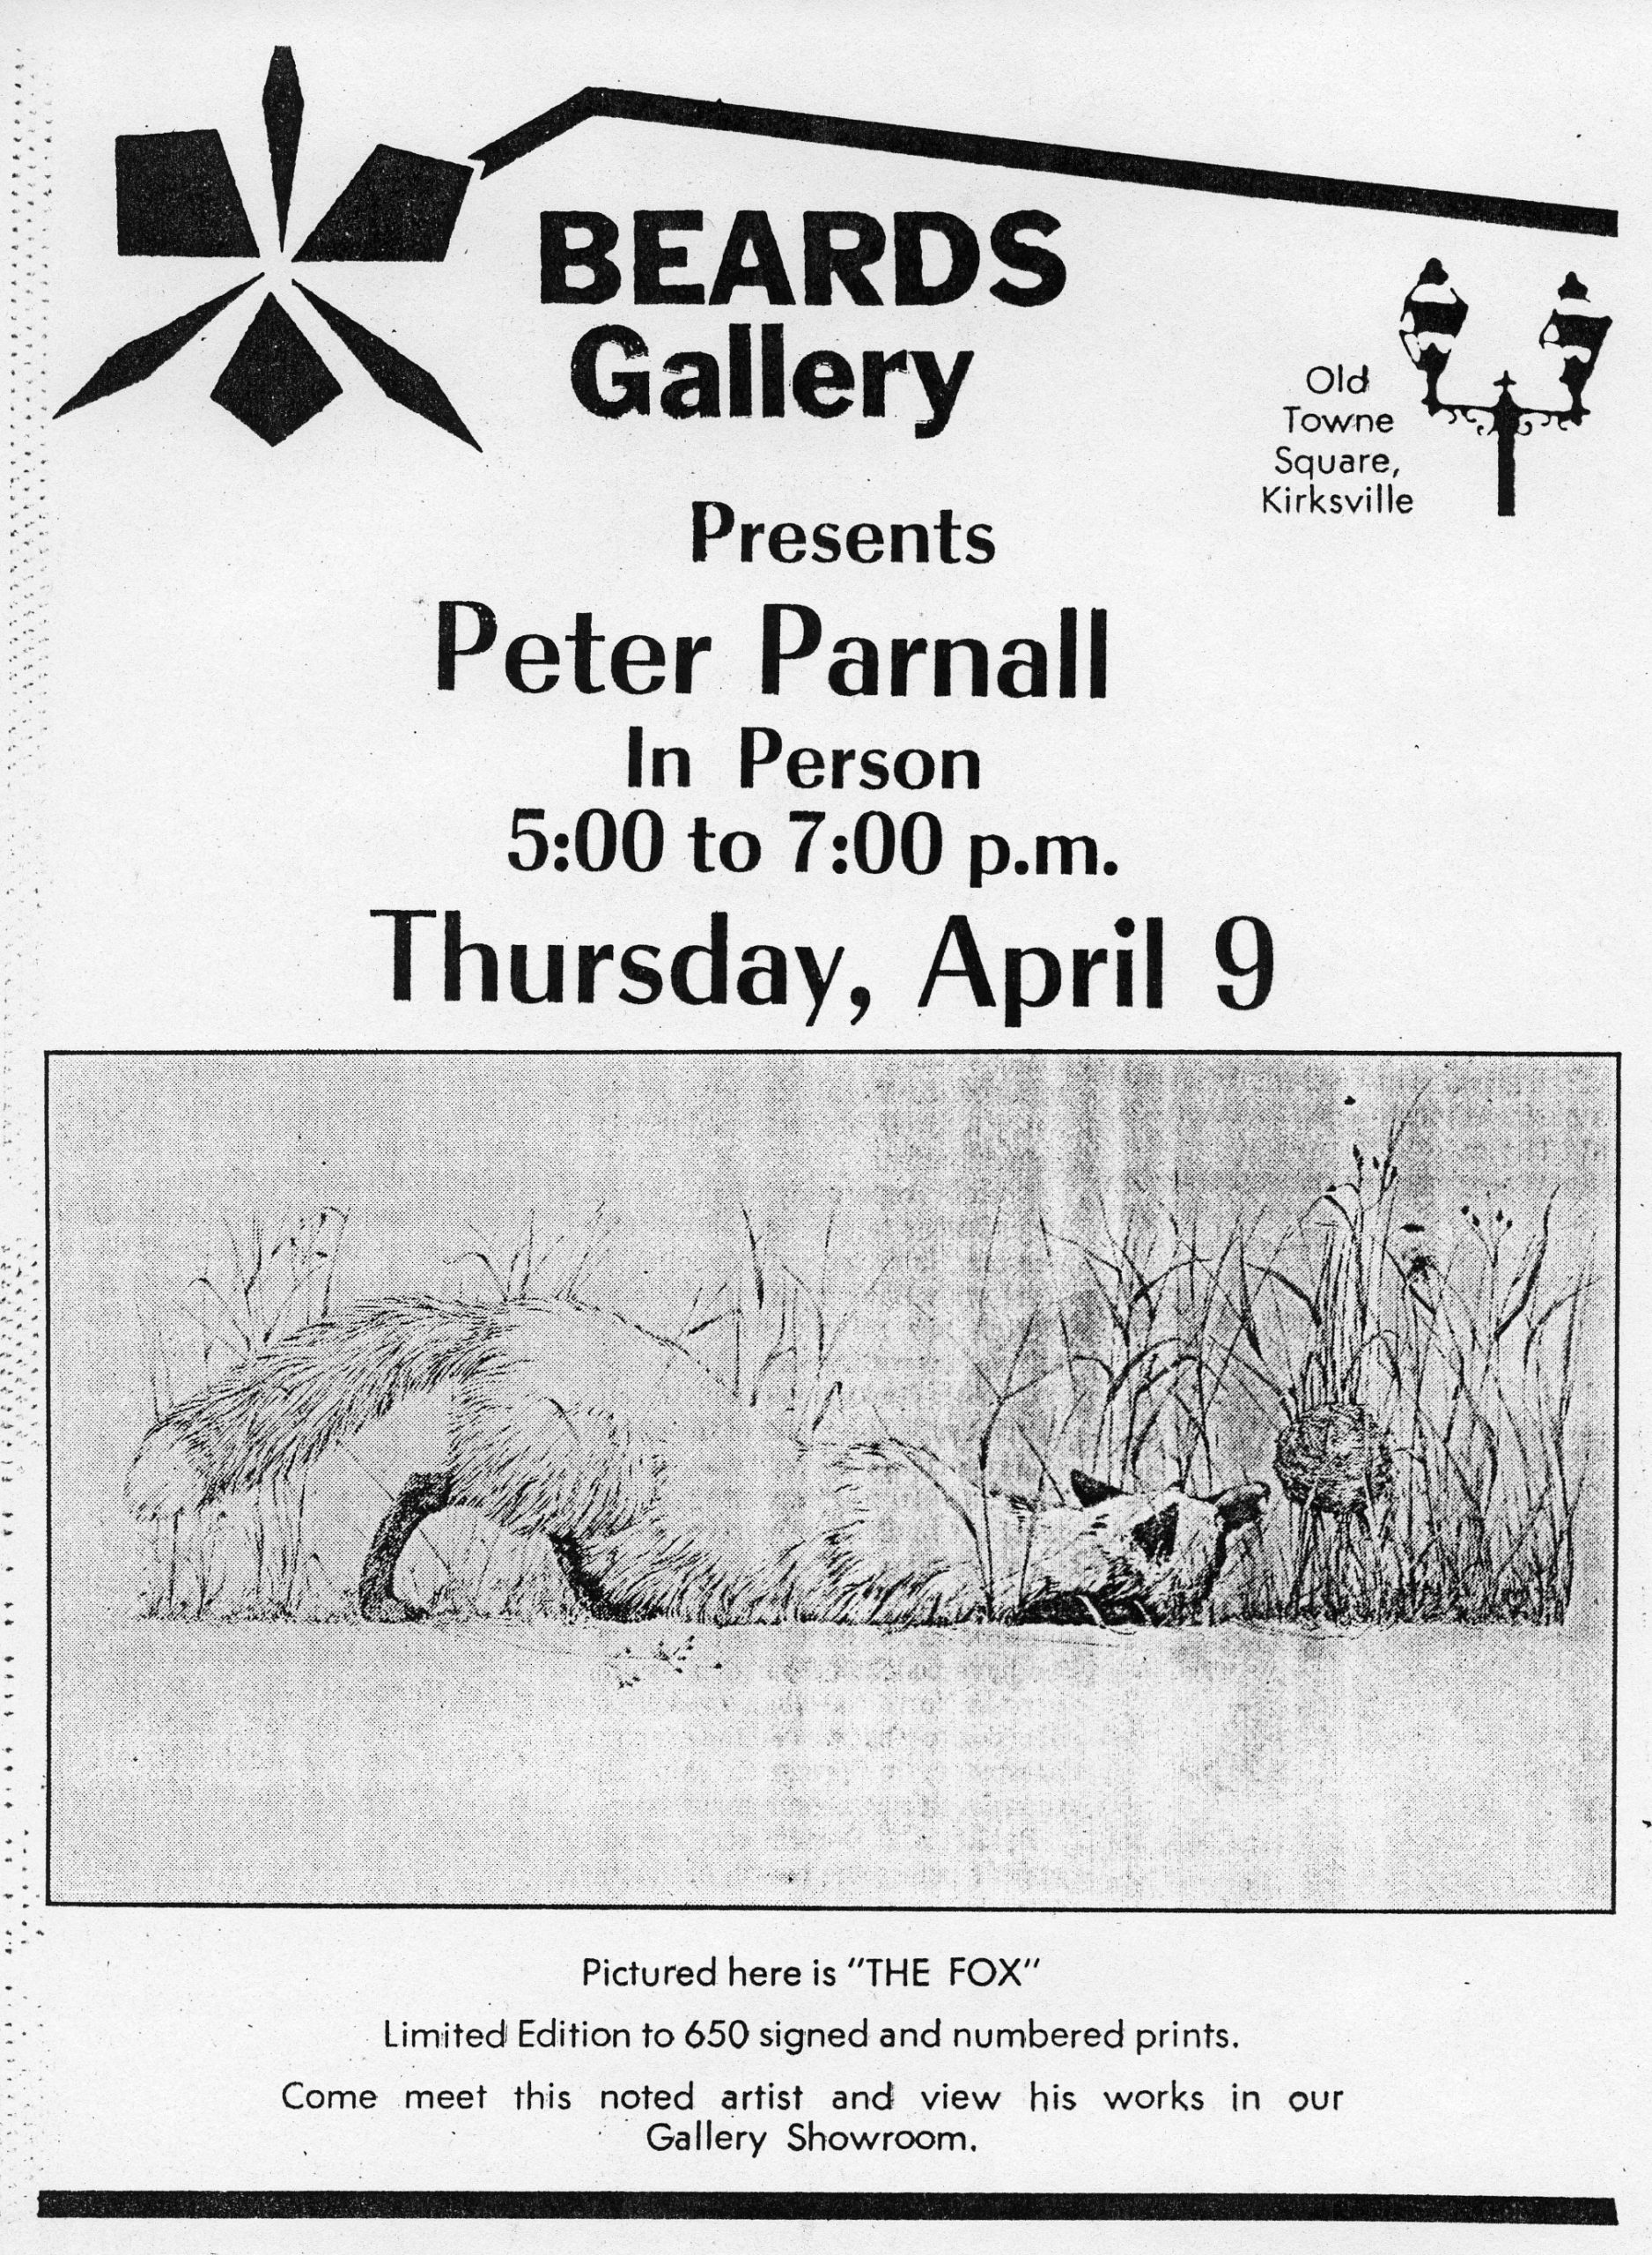 Beards Gallery ad for Peter Parnall with fox illustration